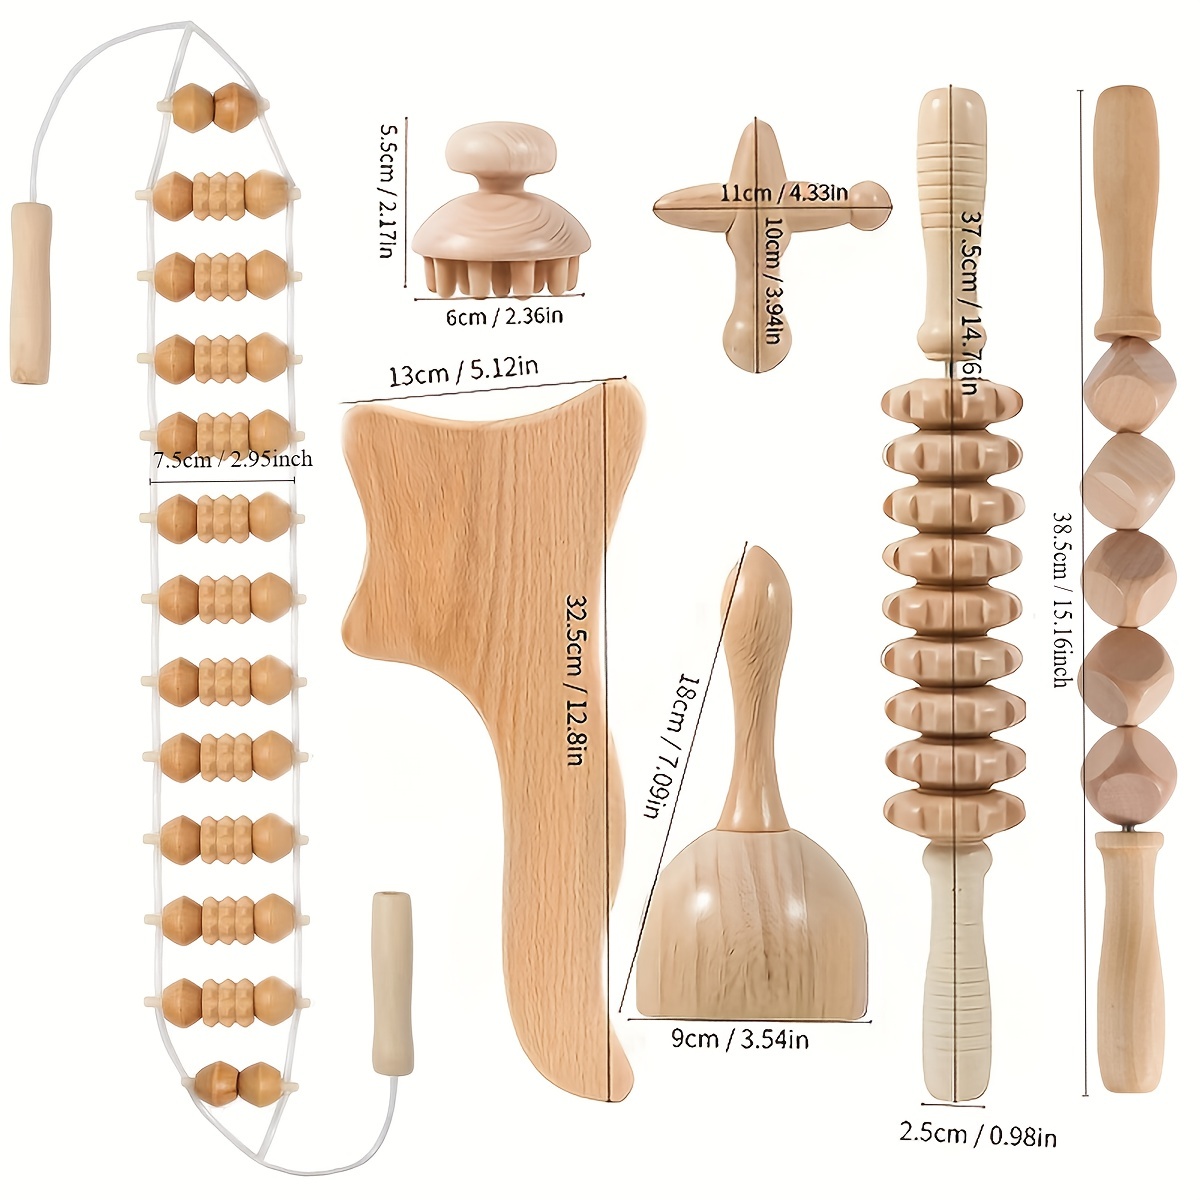 Wood Massage Therapy Tools For : Foot ✓ Hand ✓ Back - Wooden Earth